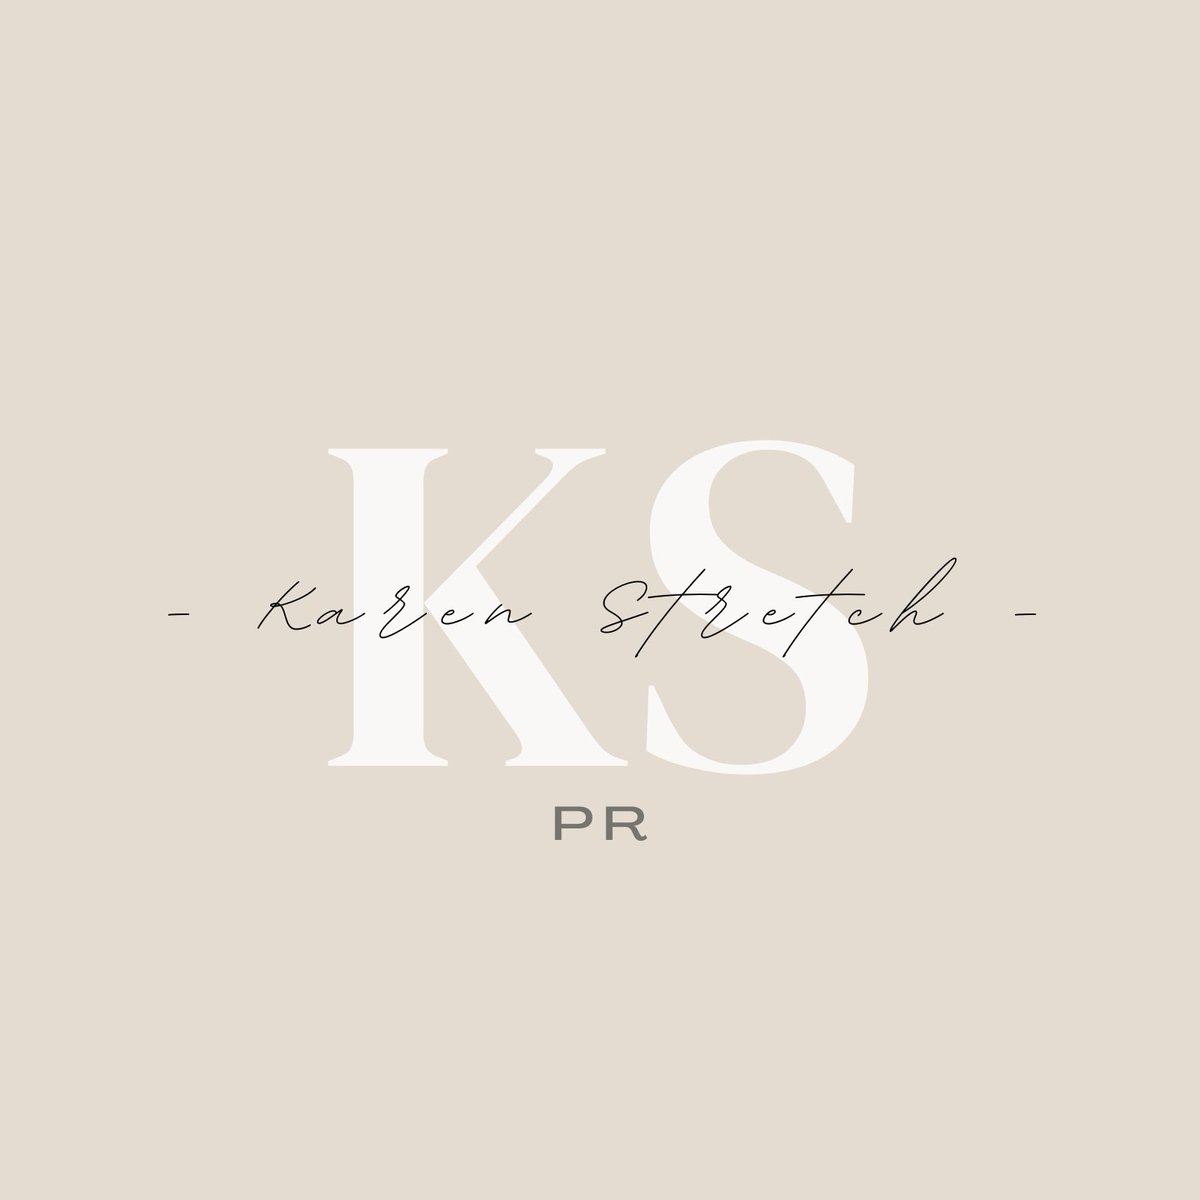 *KSPR launched today 🎉 *
From strategy to campaigns and everything in between. I’ve created multiple bestsellers and am known for exemplary author care and a wealth of media contacts built up over 28 years. Weblink in bio #publicity #bookpublicity #artsandentertainment #books